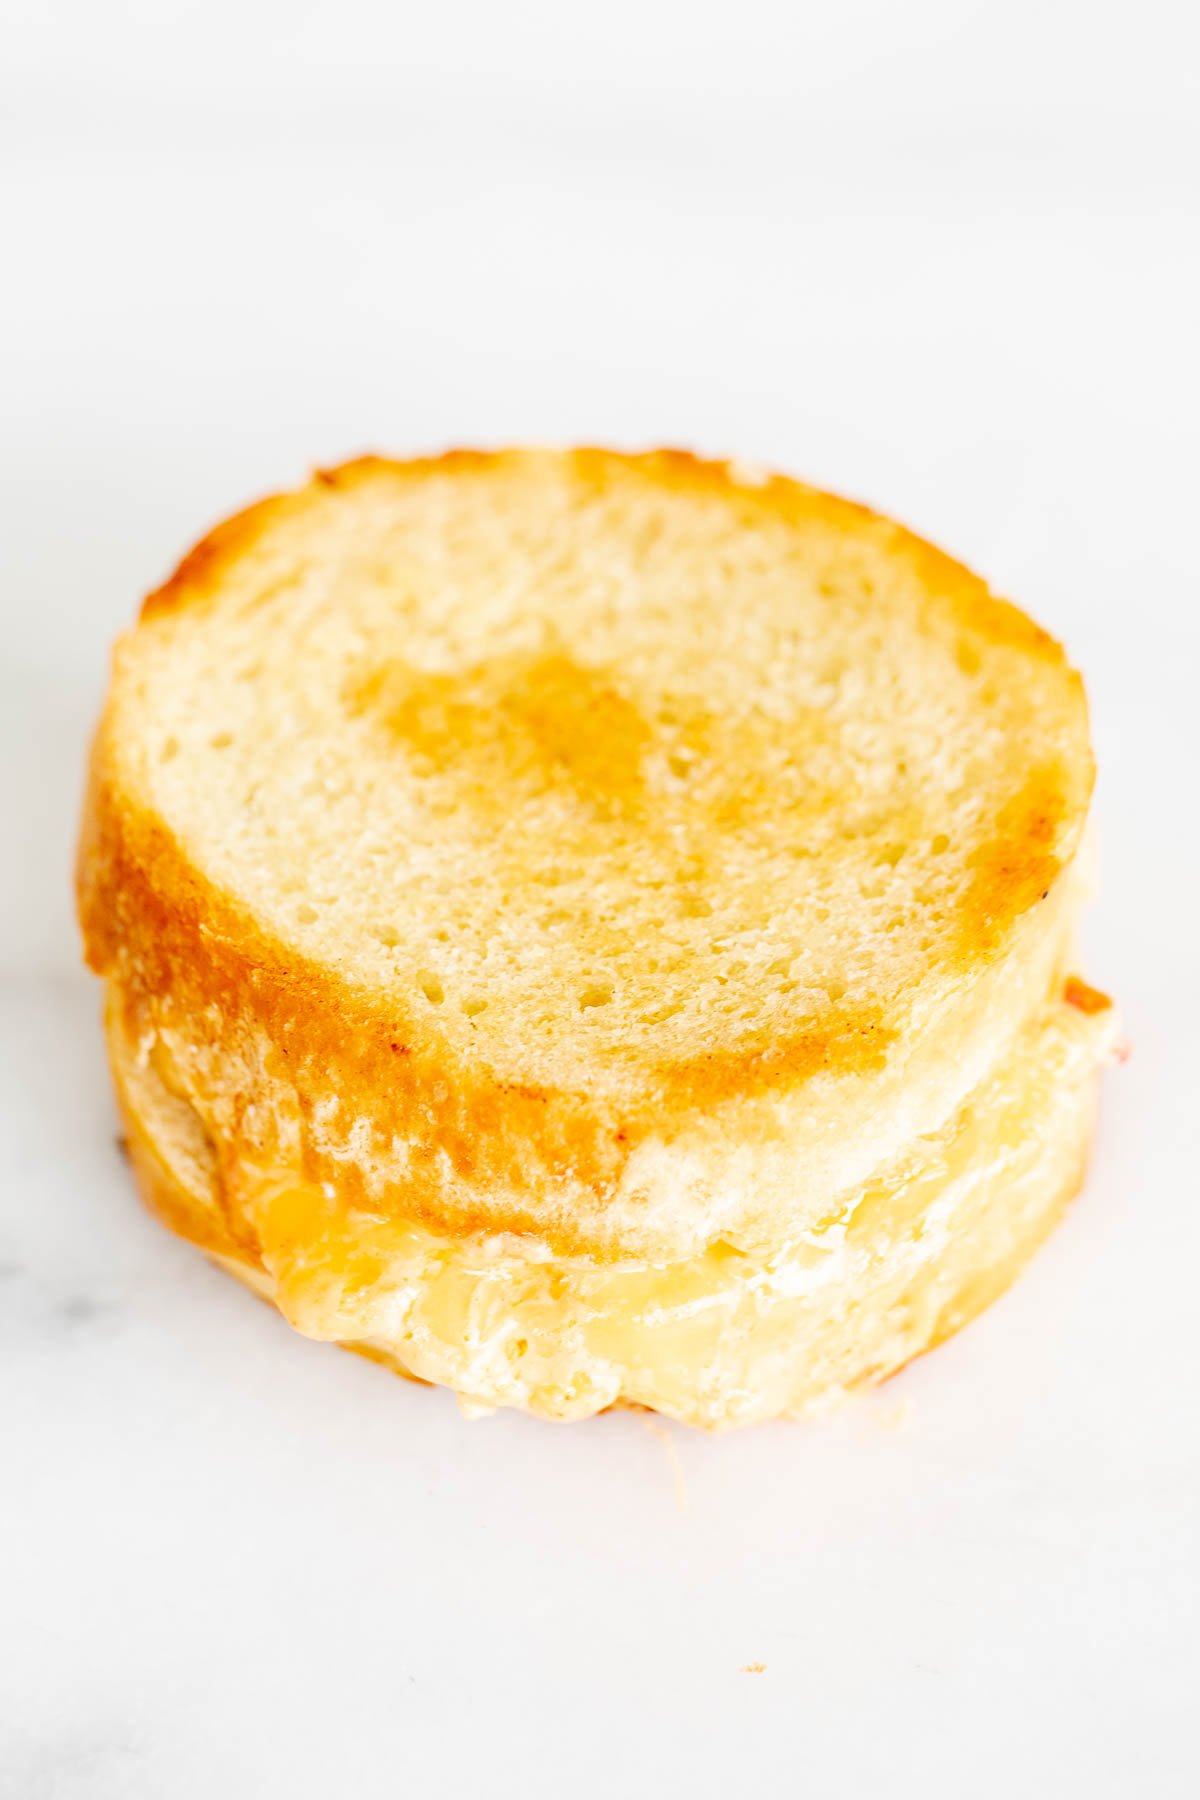 A pimento grilled cheese sandwich on round bread, on a marble countertop.